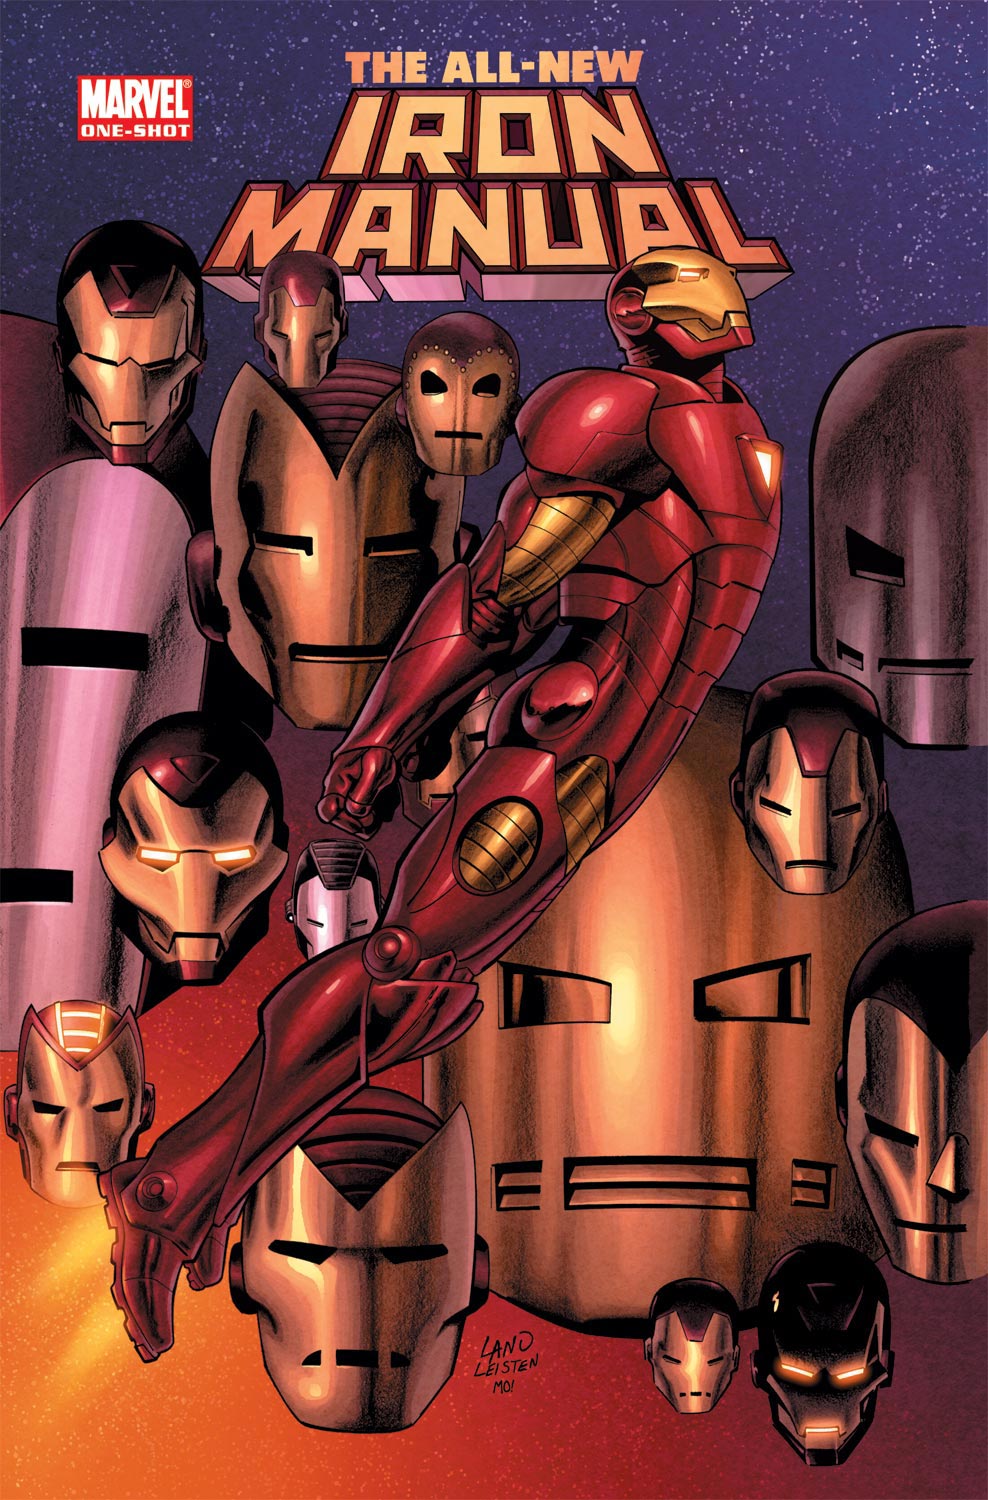 All-New Iron Manual (2008) #1